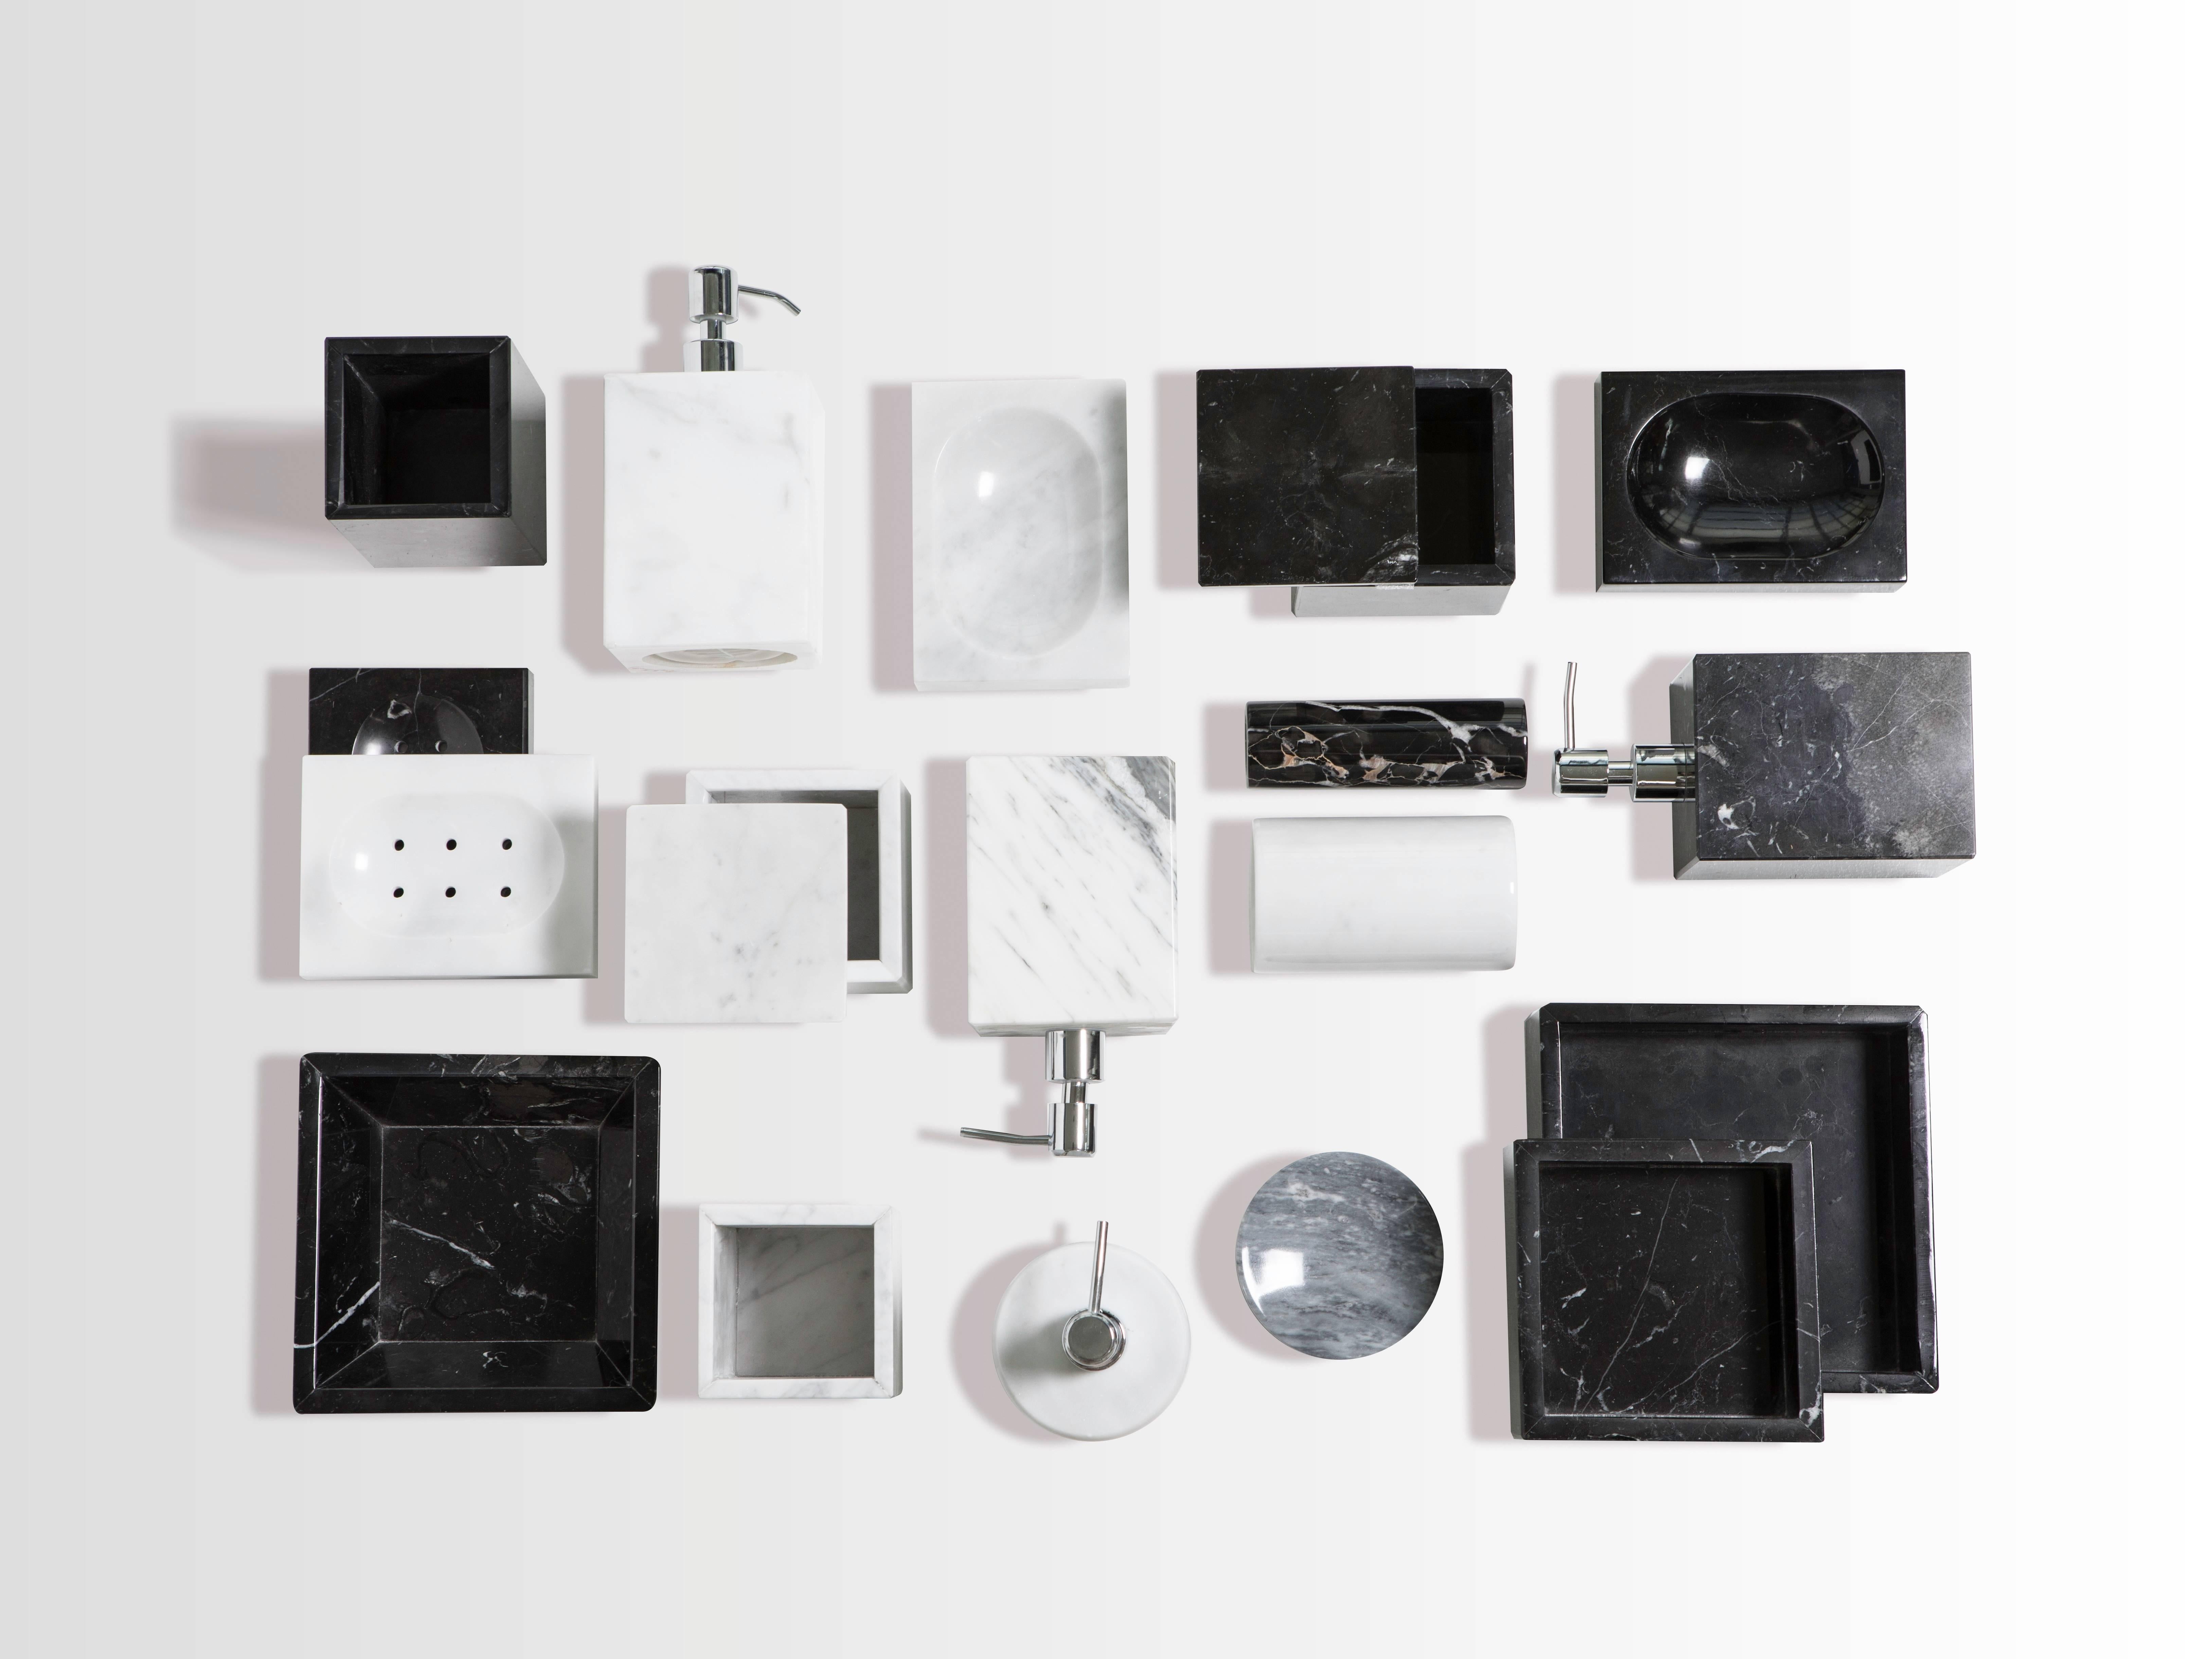 A squared set for the bathroom in white Carrara marble which includes: One soap dispenser (9 x 9 x 19 cm), one soap dish (10 x 13 x 2 cm), one toothbrush holder (8.5 x 8.5 x 12 cm), one box holder with lid (9.5 x 9.5 x 9.5 cm).
Each piece is in a